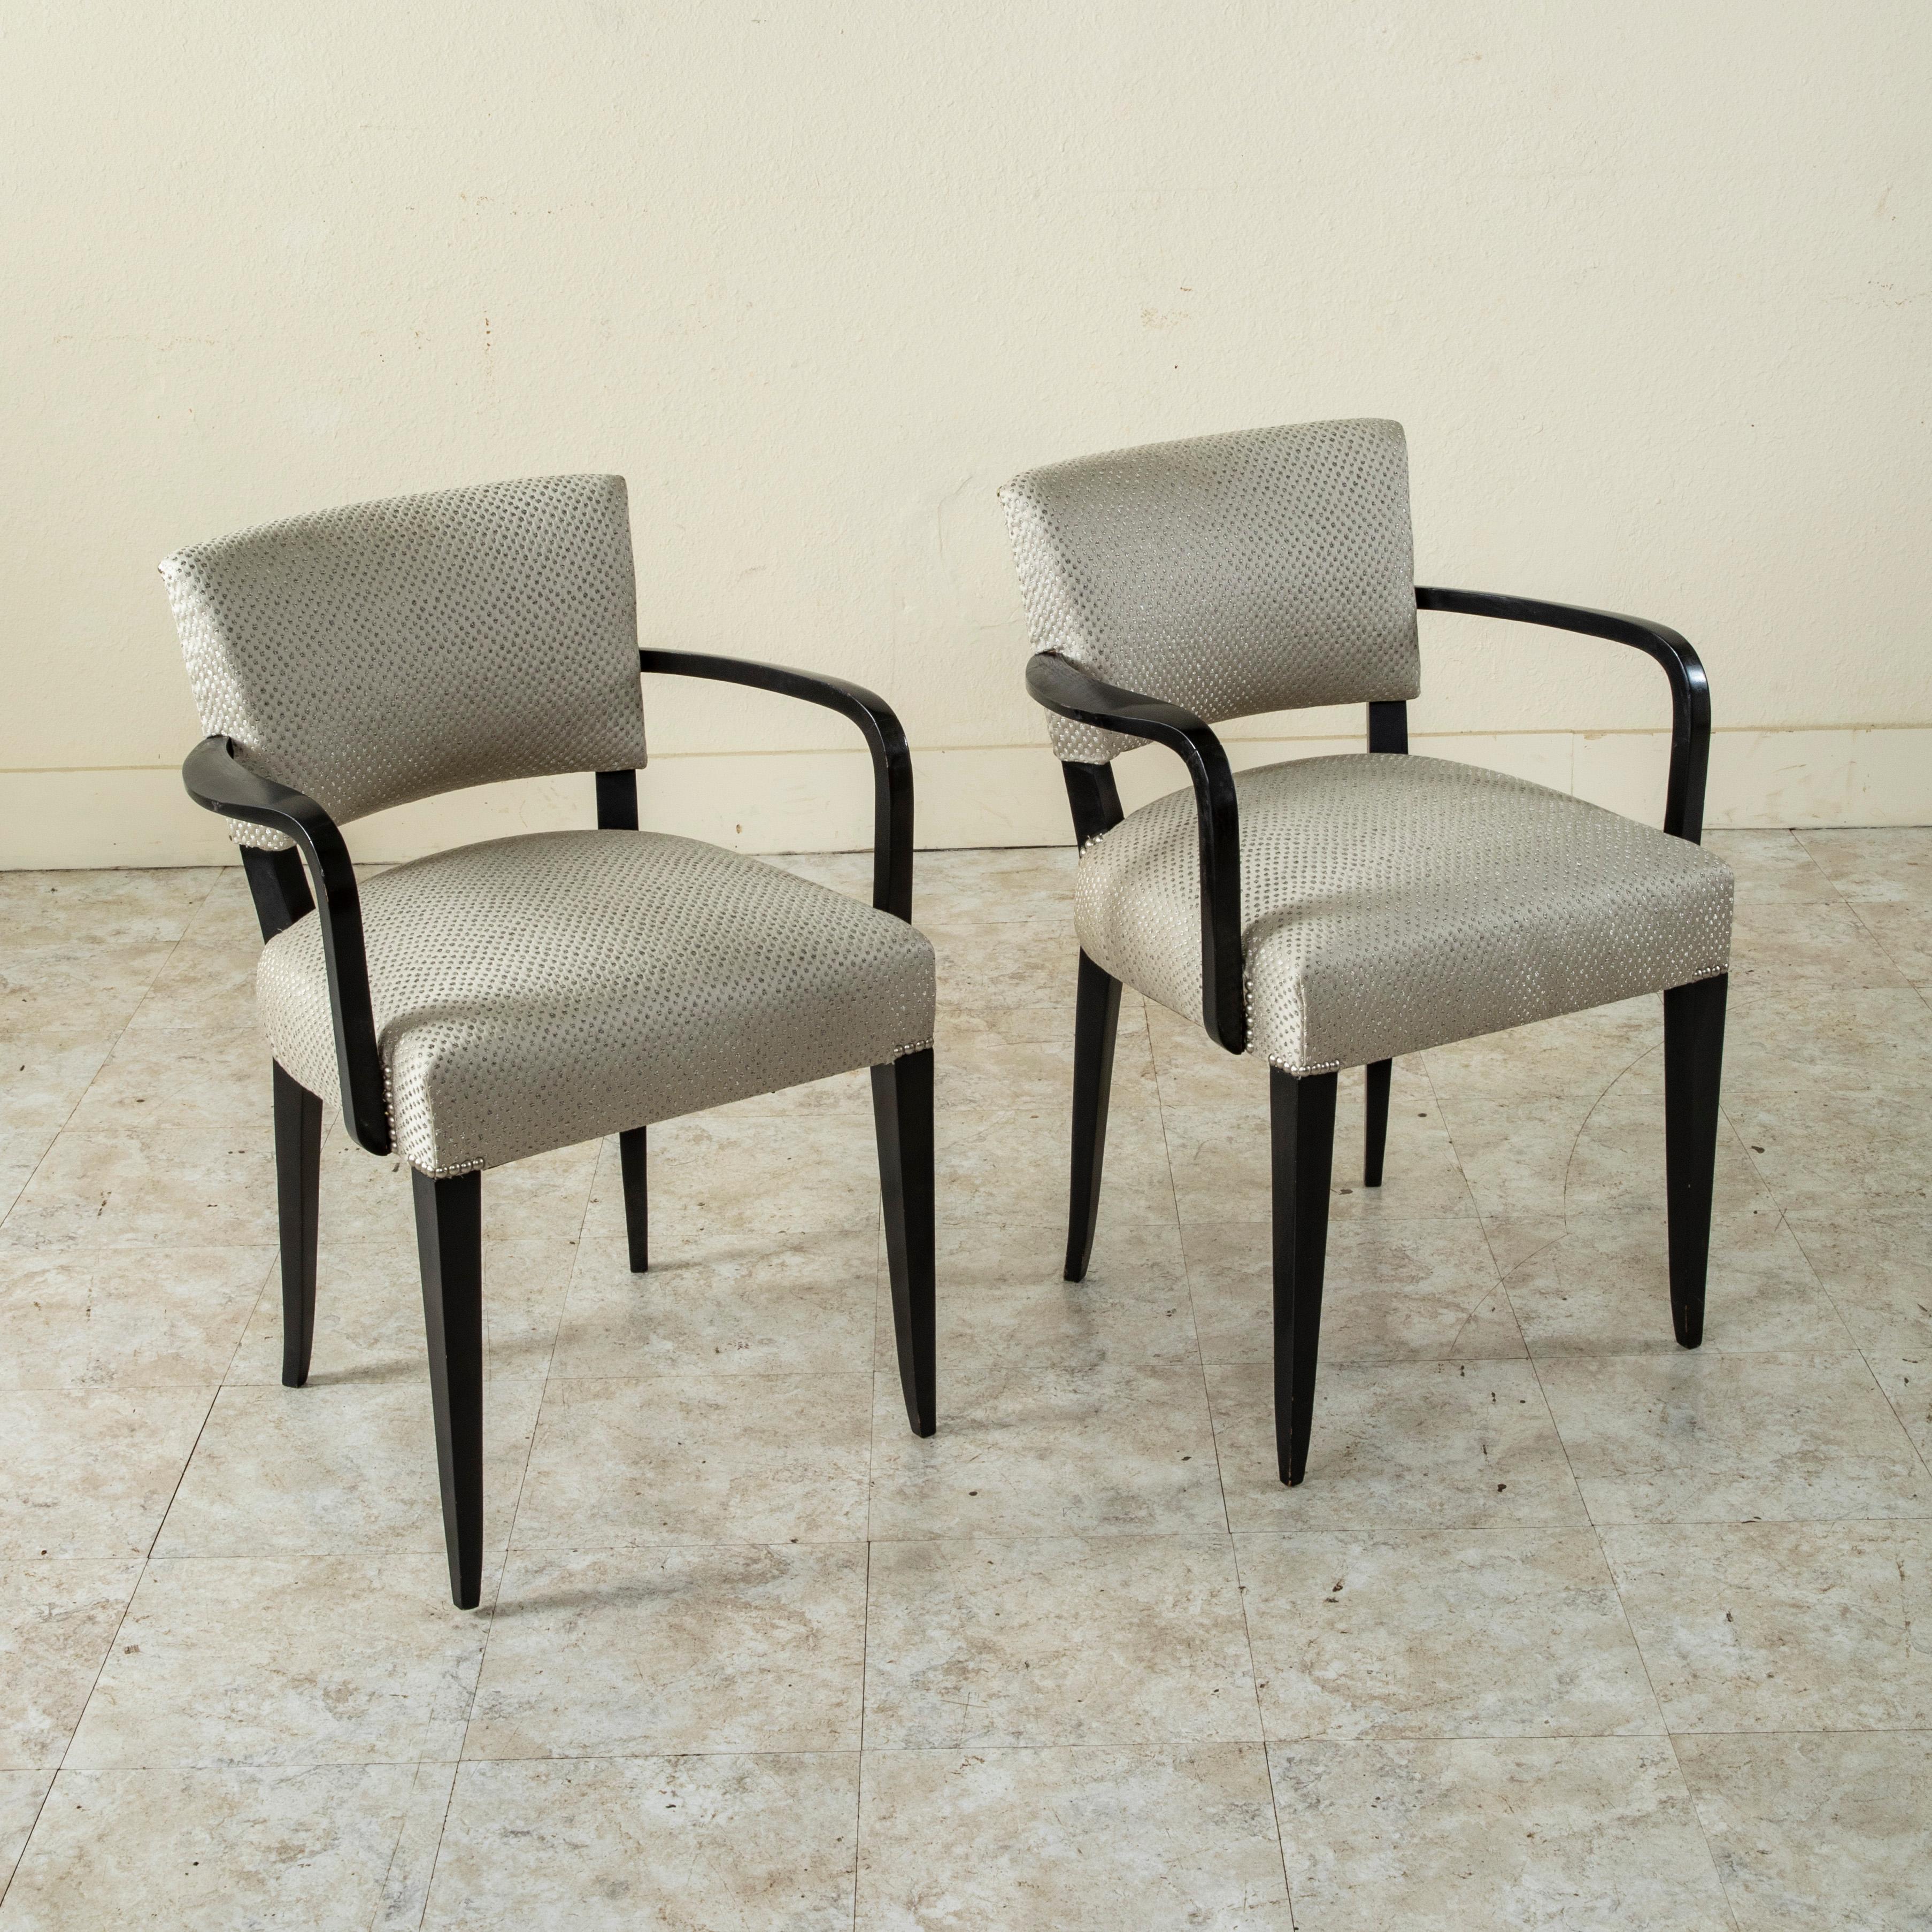 This pair of mid-twentieth century French chairs features black lacquered frames with curved armrests. The French refer to these as bridge chairs since this style was popular at the bridge table in the 1940's. Newly upholstered in France and